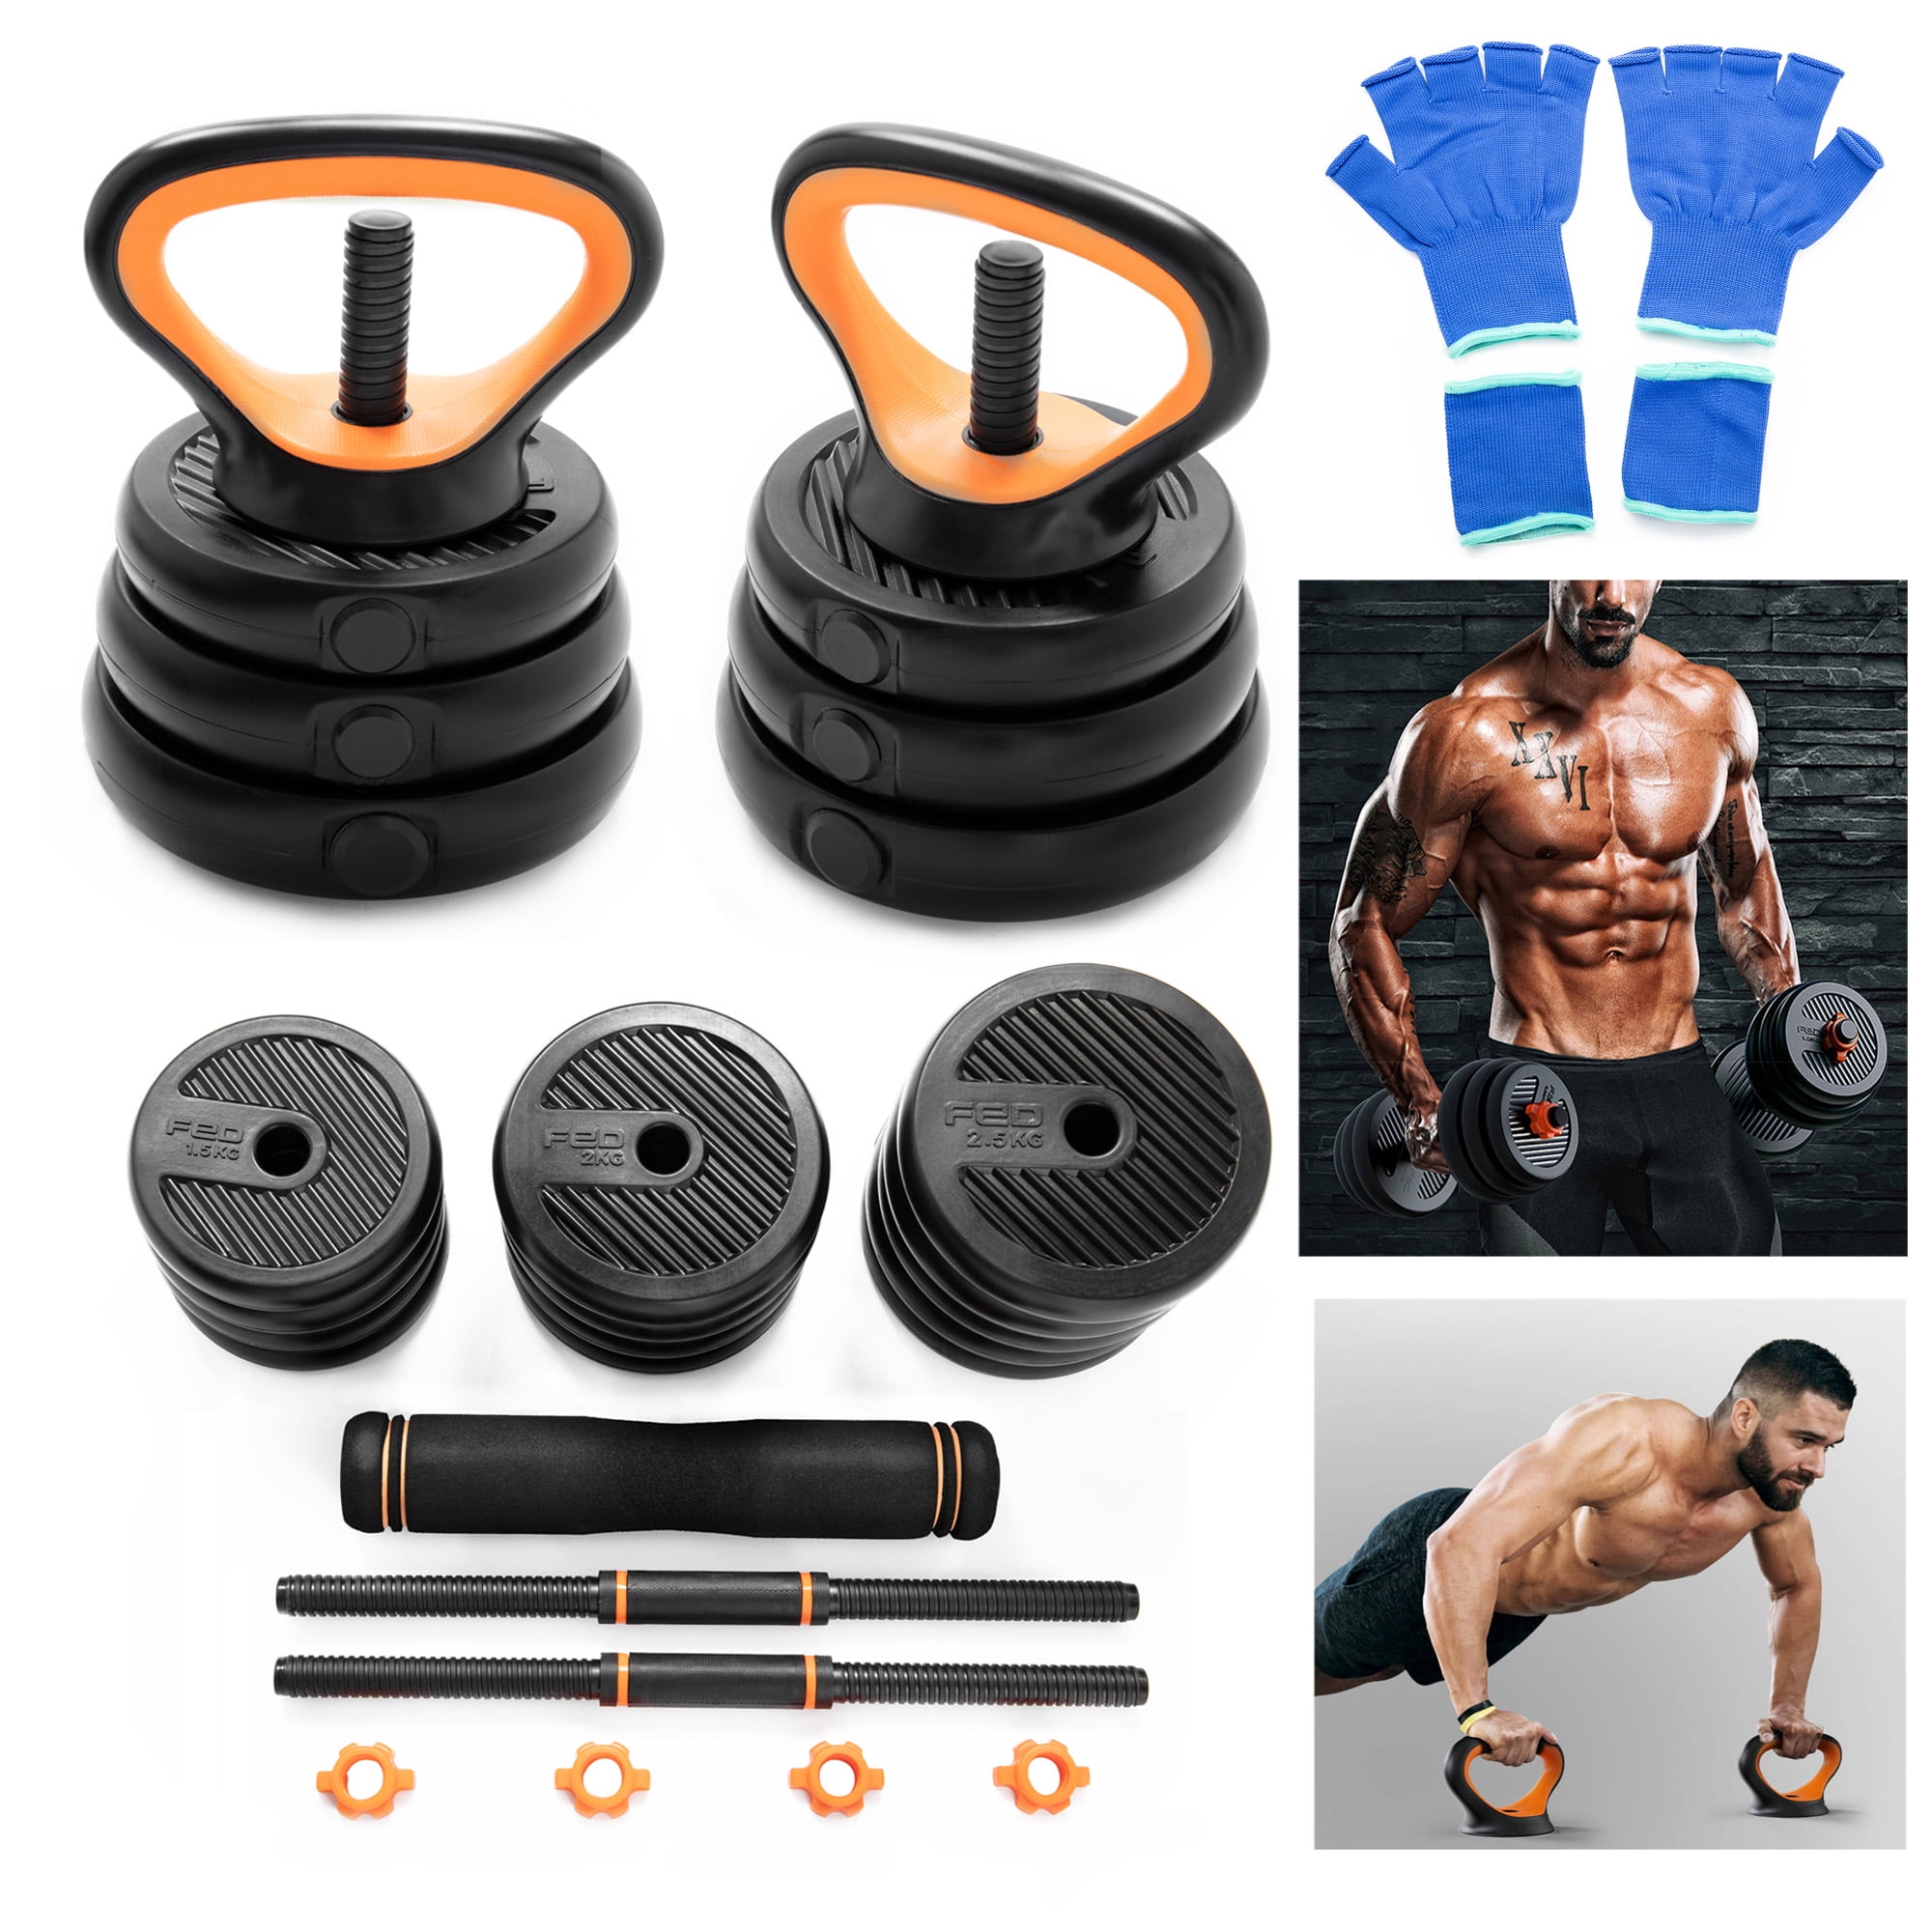 Details about   USA Adjustable Dumbbell Barbells Weight 77lbs Exercise & Fitness For Home Gmy 